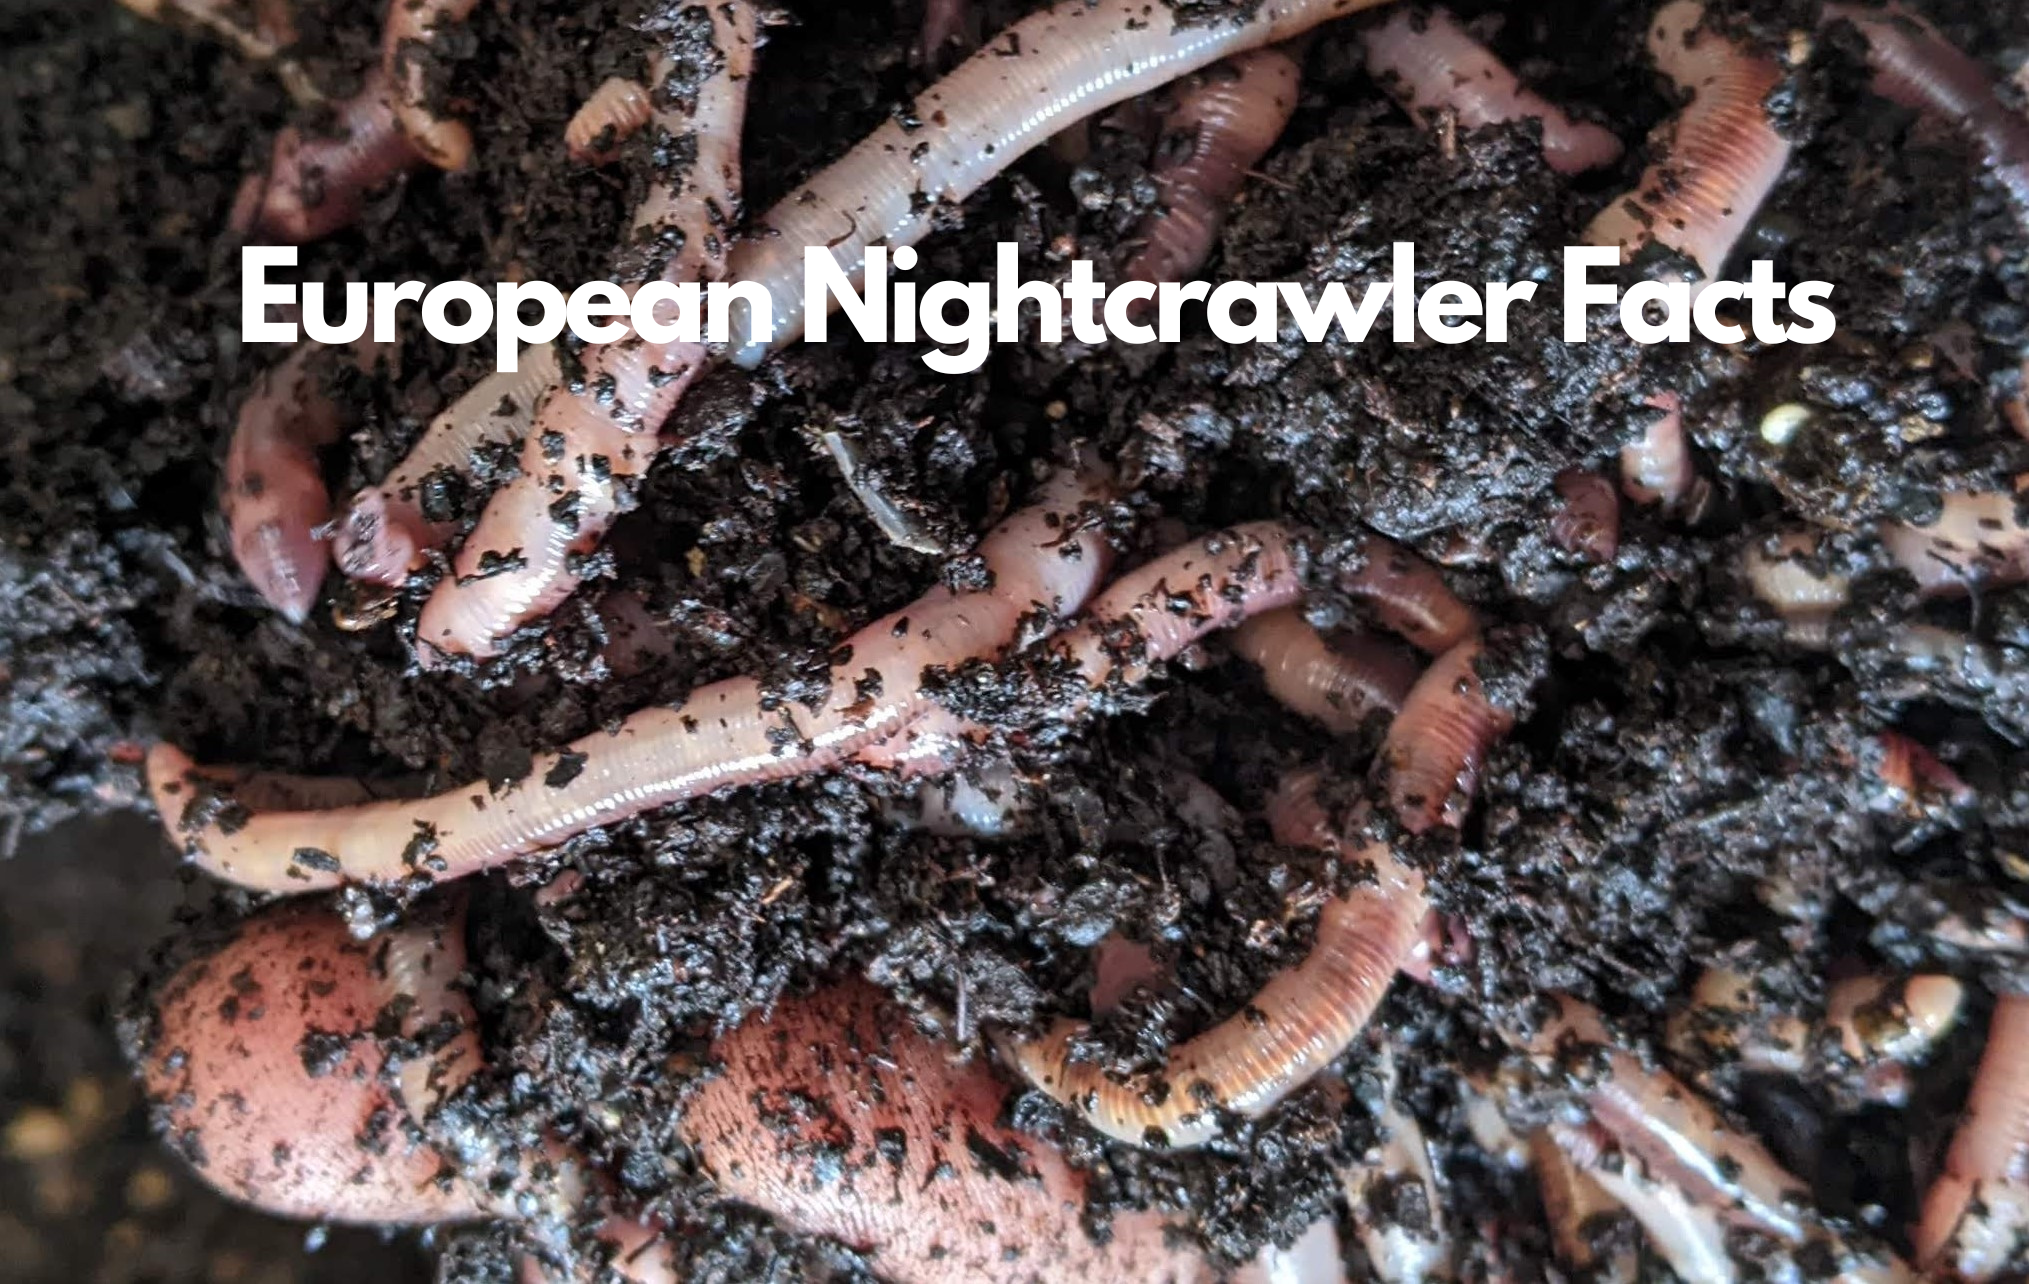 European Nightcrawler Facts: What to Know About the Diverse